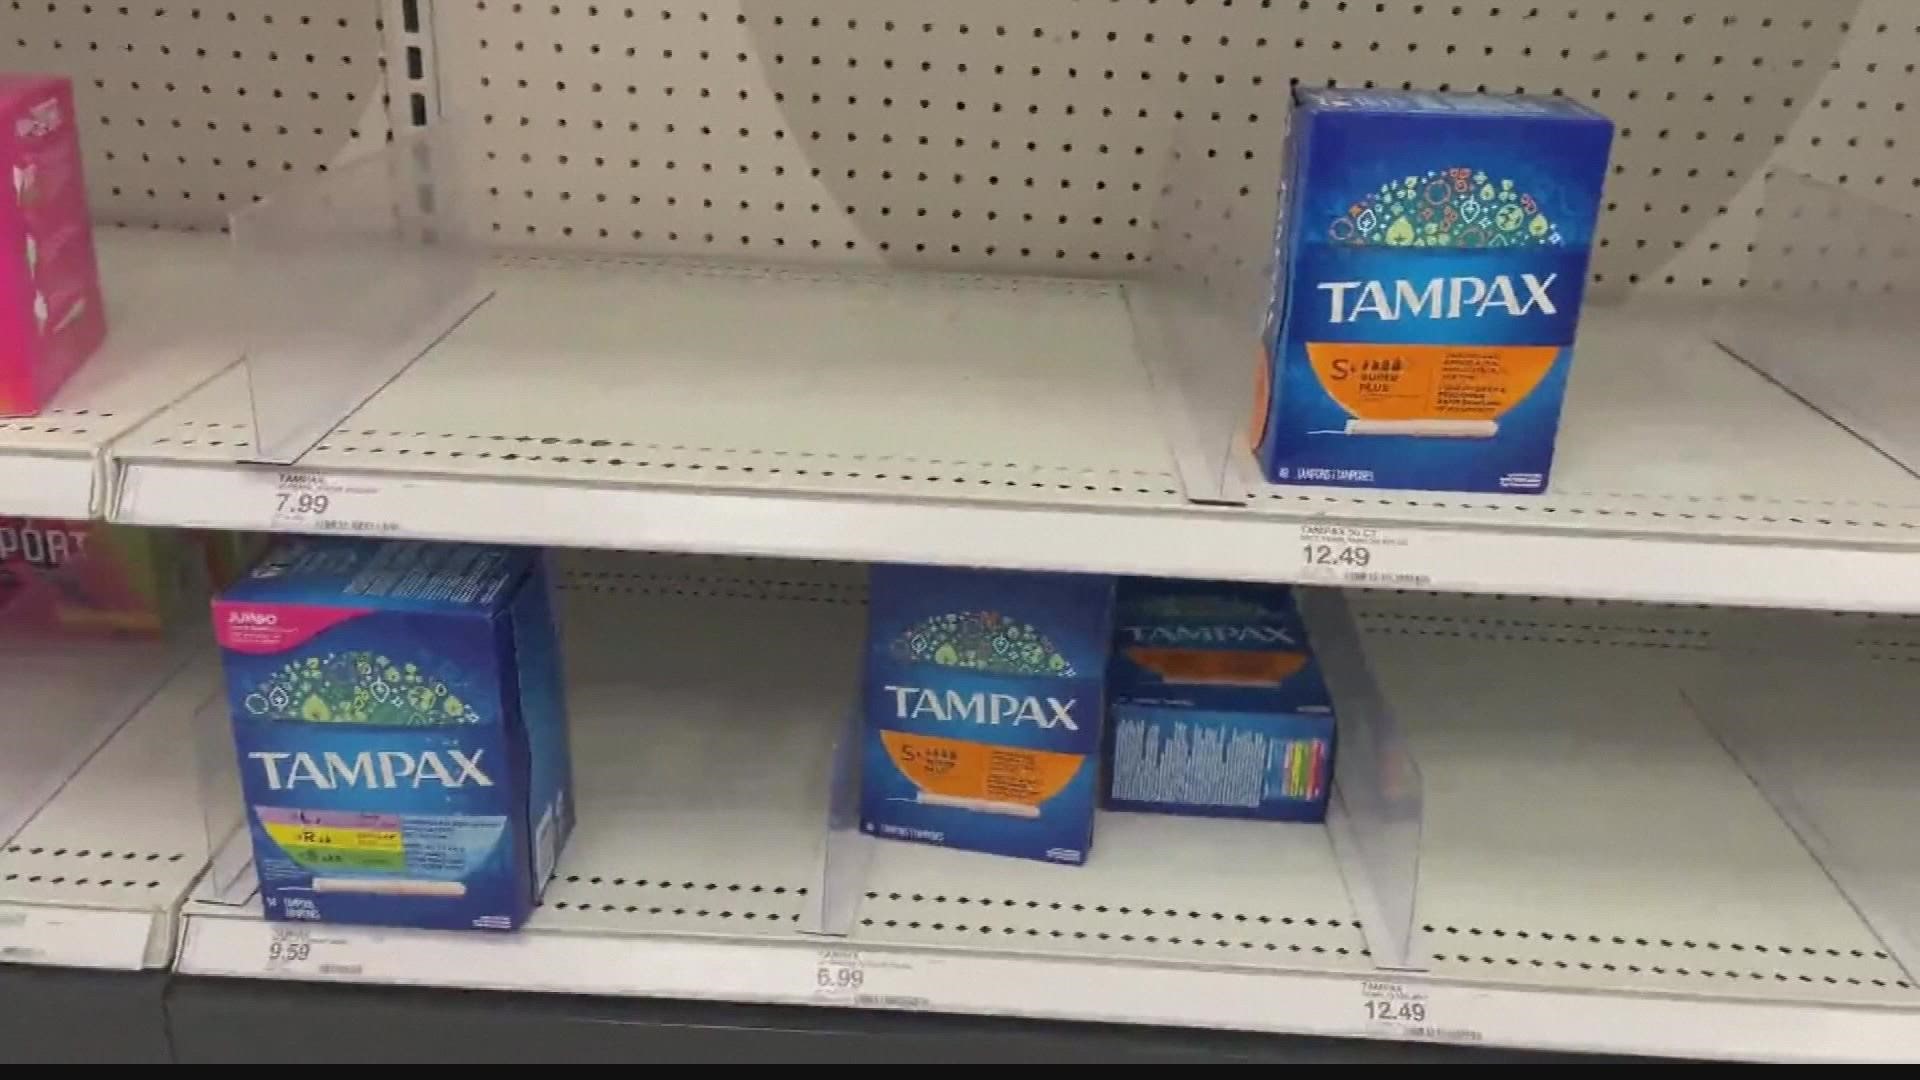 The price of feminine hygiene products is going up, if you're lucky enough to find them. The problem is more than a minor inconvenience, it's also a health concern.